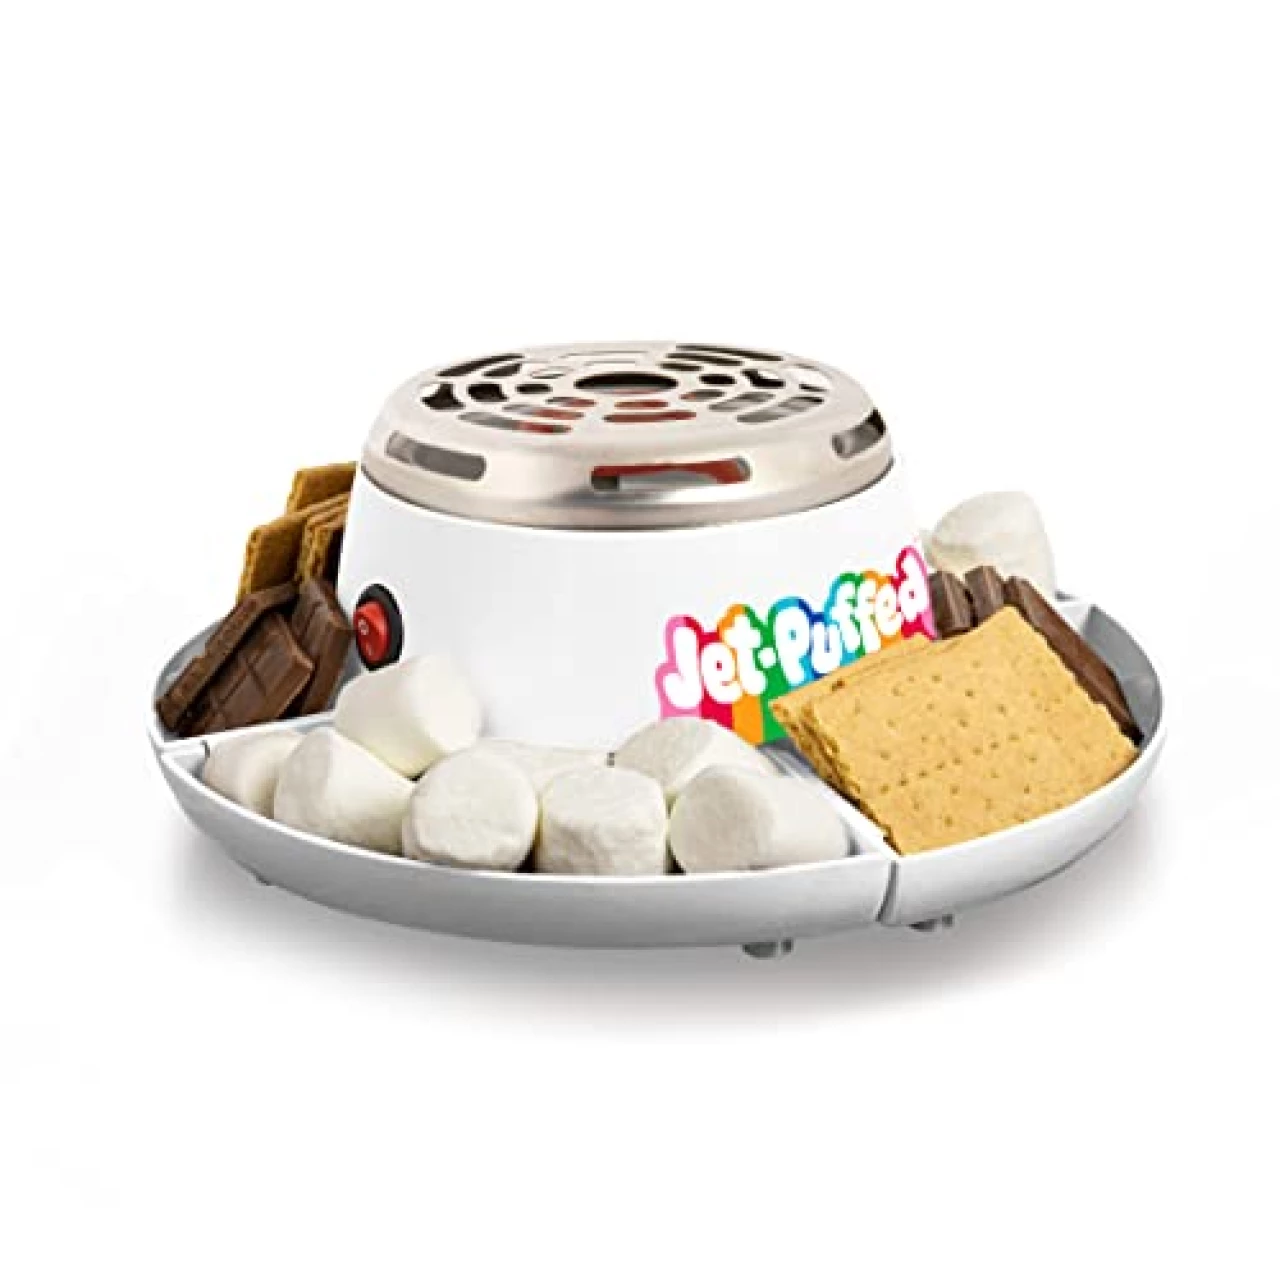 Nostalgia Jet-Puffed Tabletop Indoor Electric S&rsquo;mores Maker - Smores Kit With Marshmallow Roasting Sticks and 4 Compartment Trays for Graham Crackers, Chocolate, Marshmallows - White